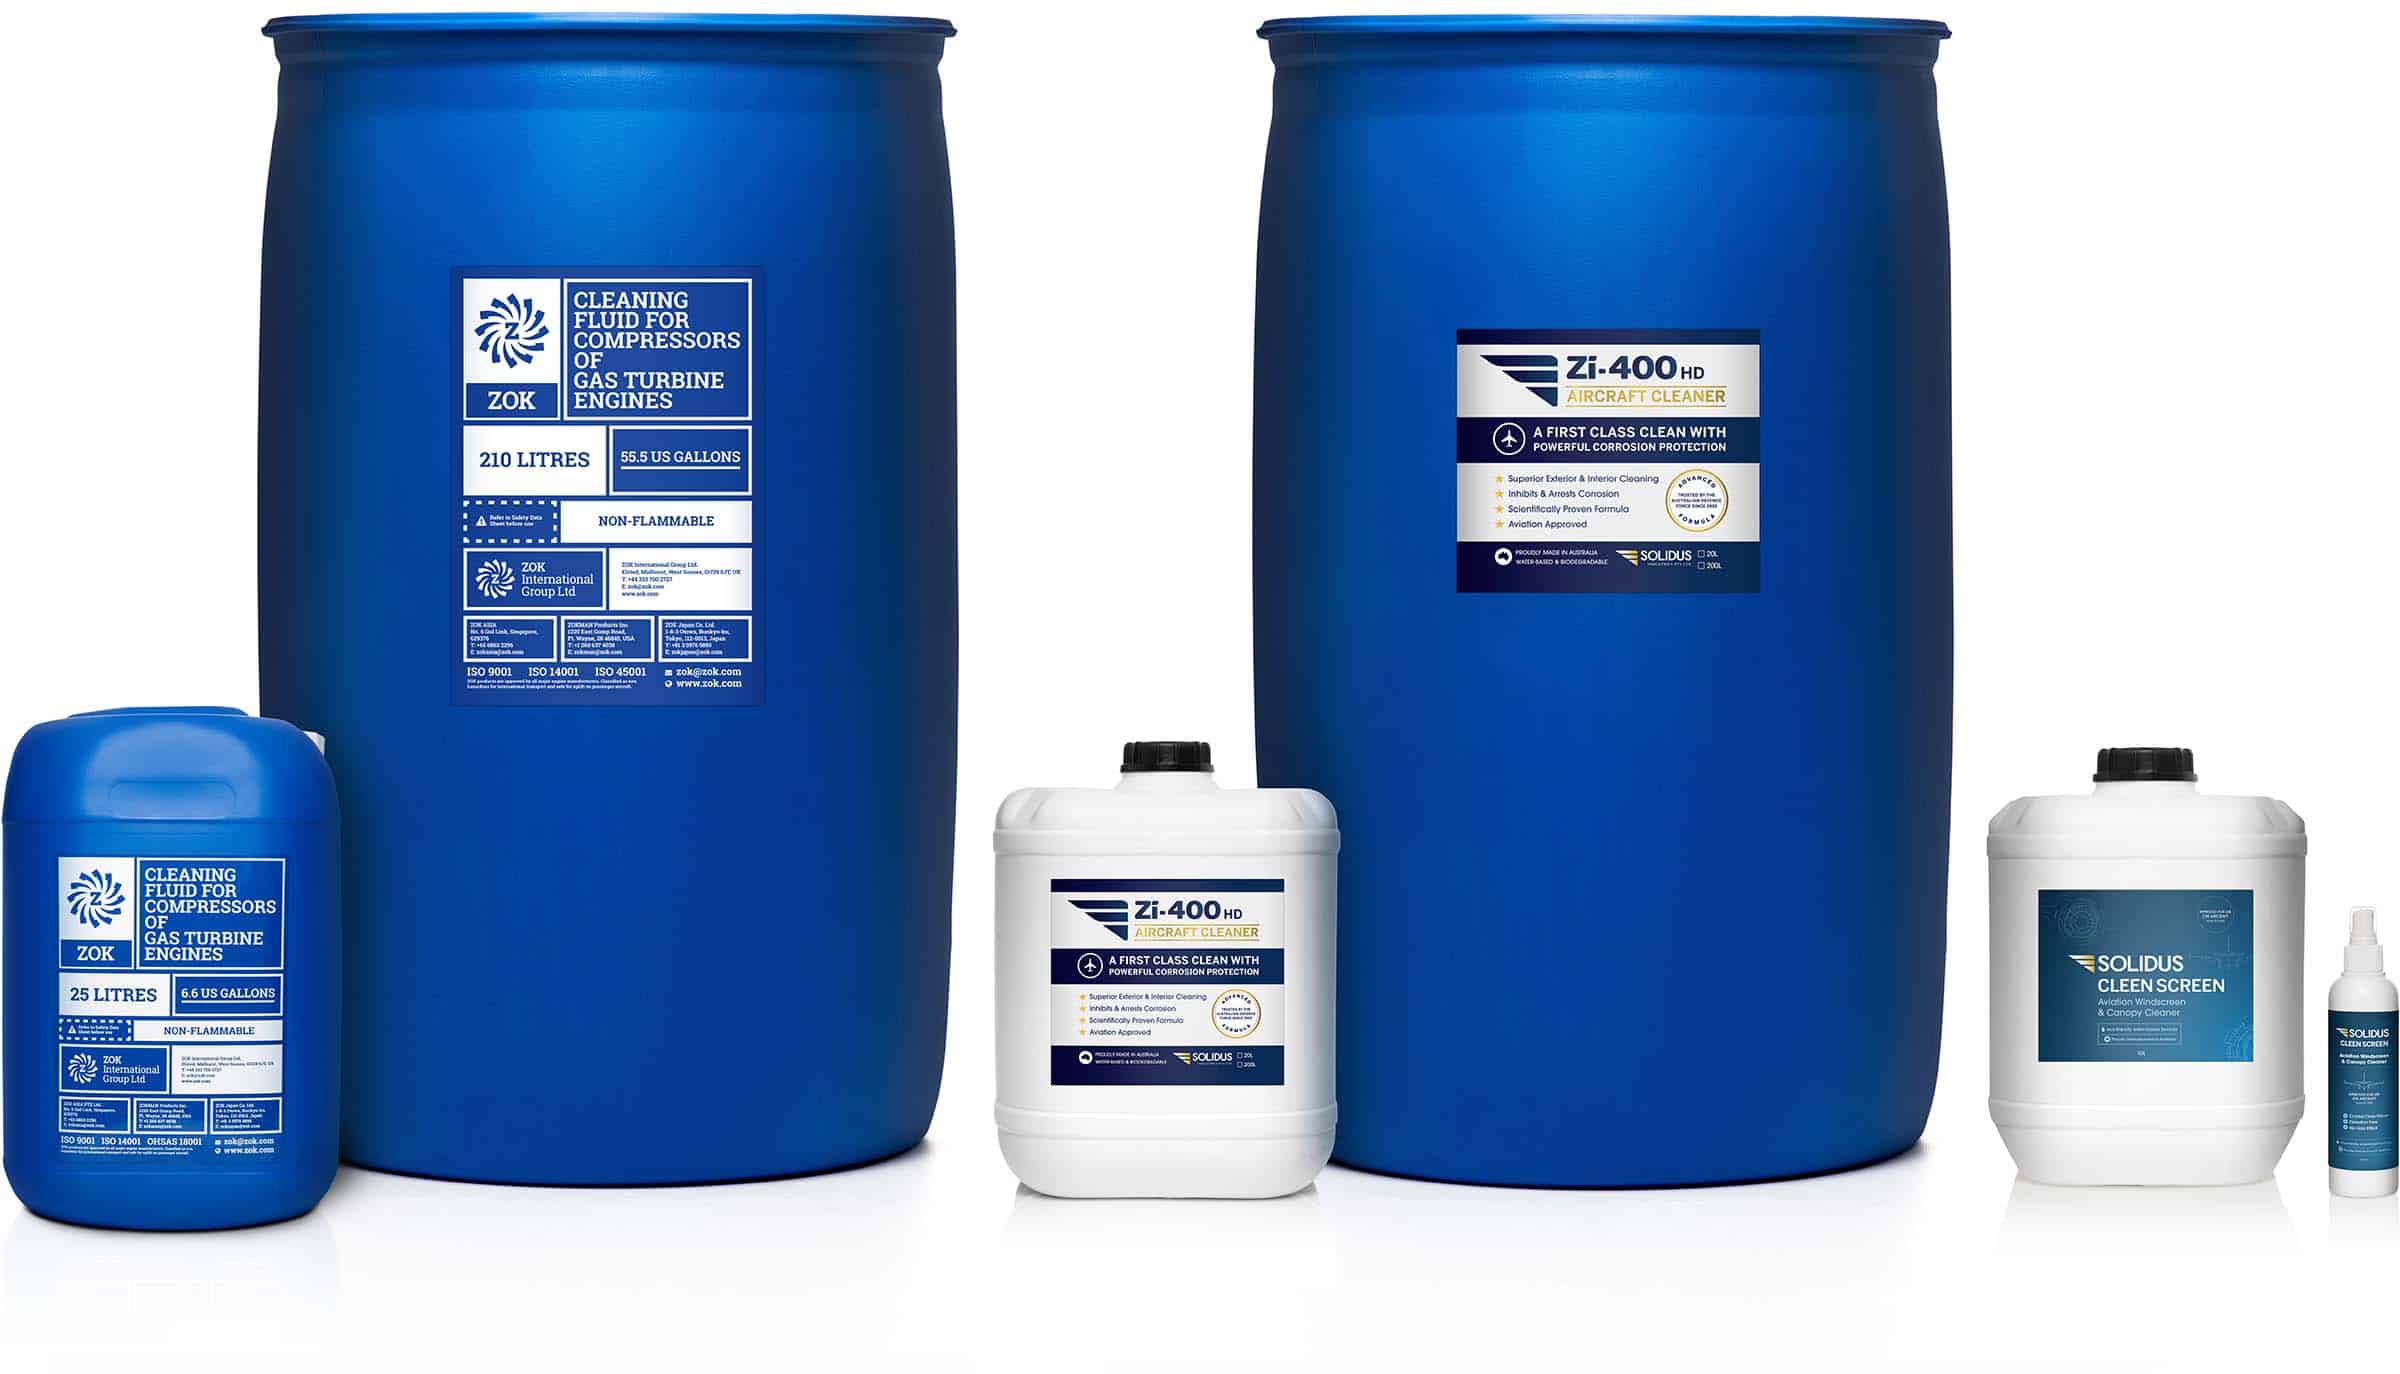 Solidus Industries Aircraft Cleaning Product Range